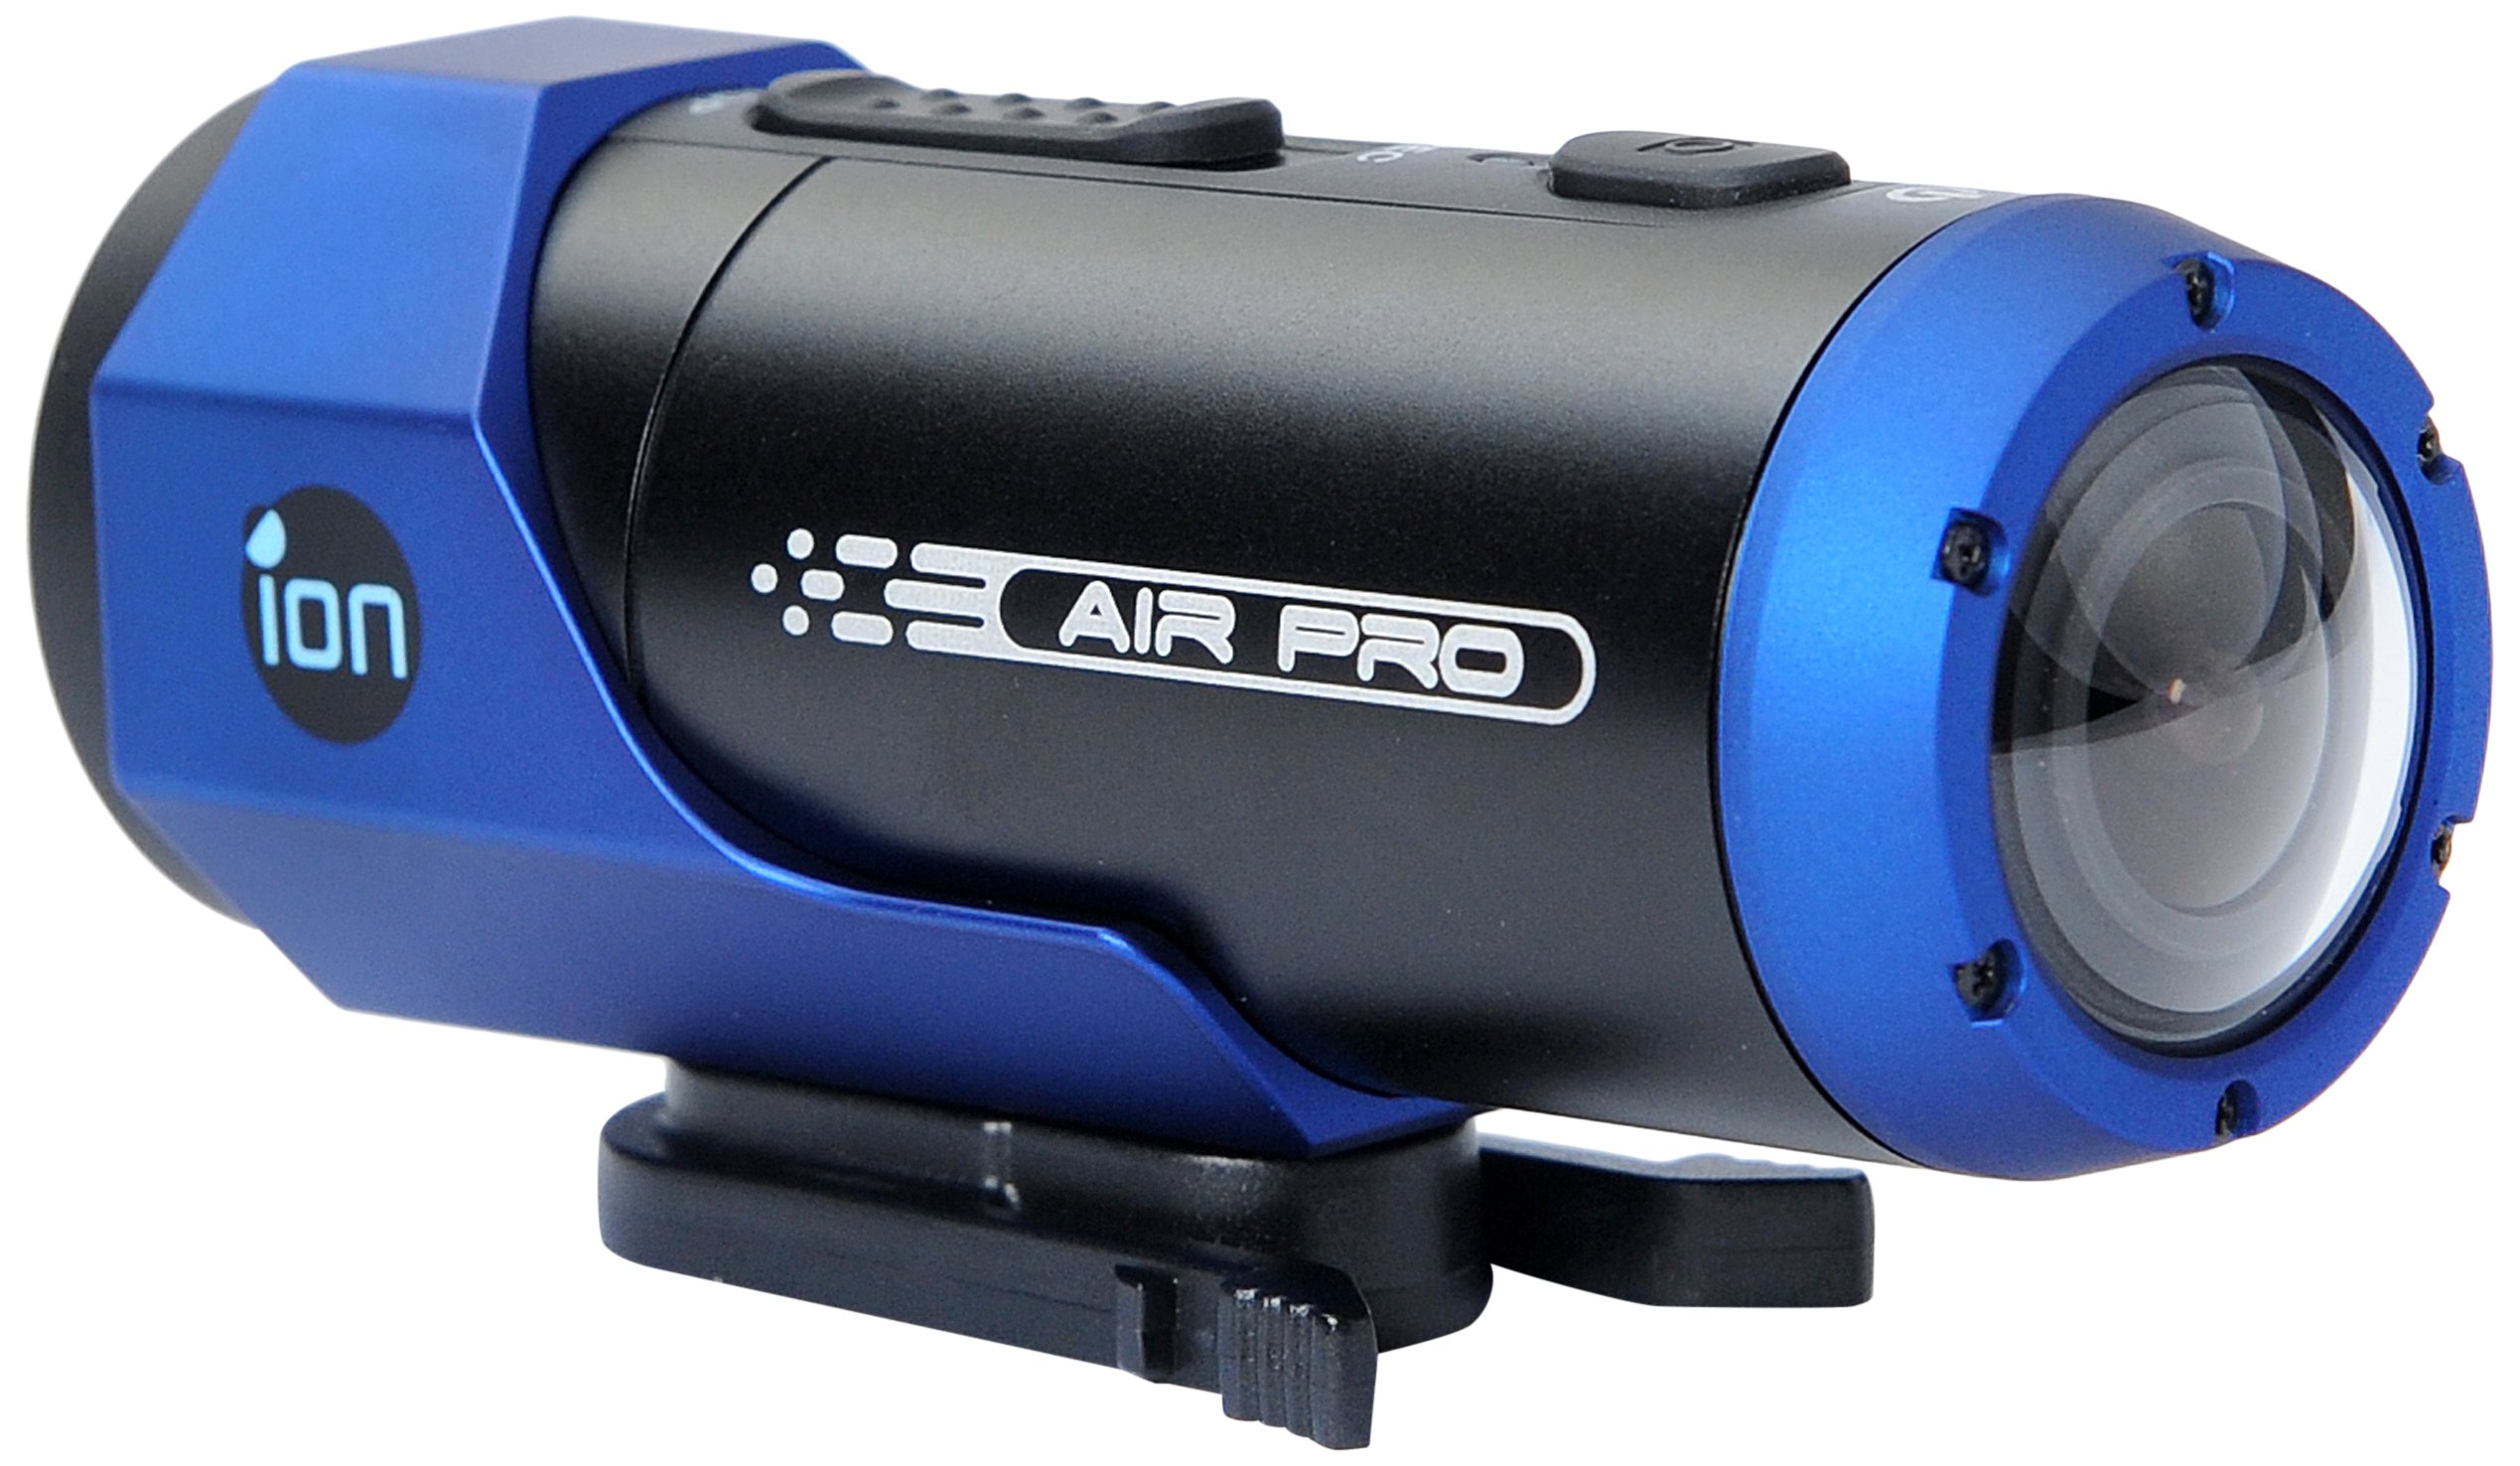 ION AIR PRO LITE WI-FI VIDEO/PICTURES 5MP 1920X1080P RECHARGEABLE BLK/BLUE - image 1 of 4